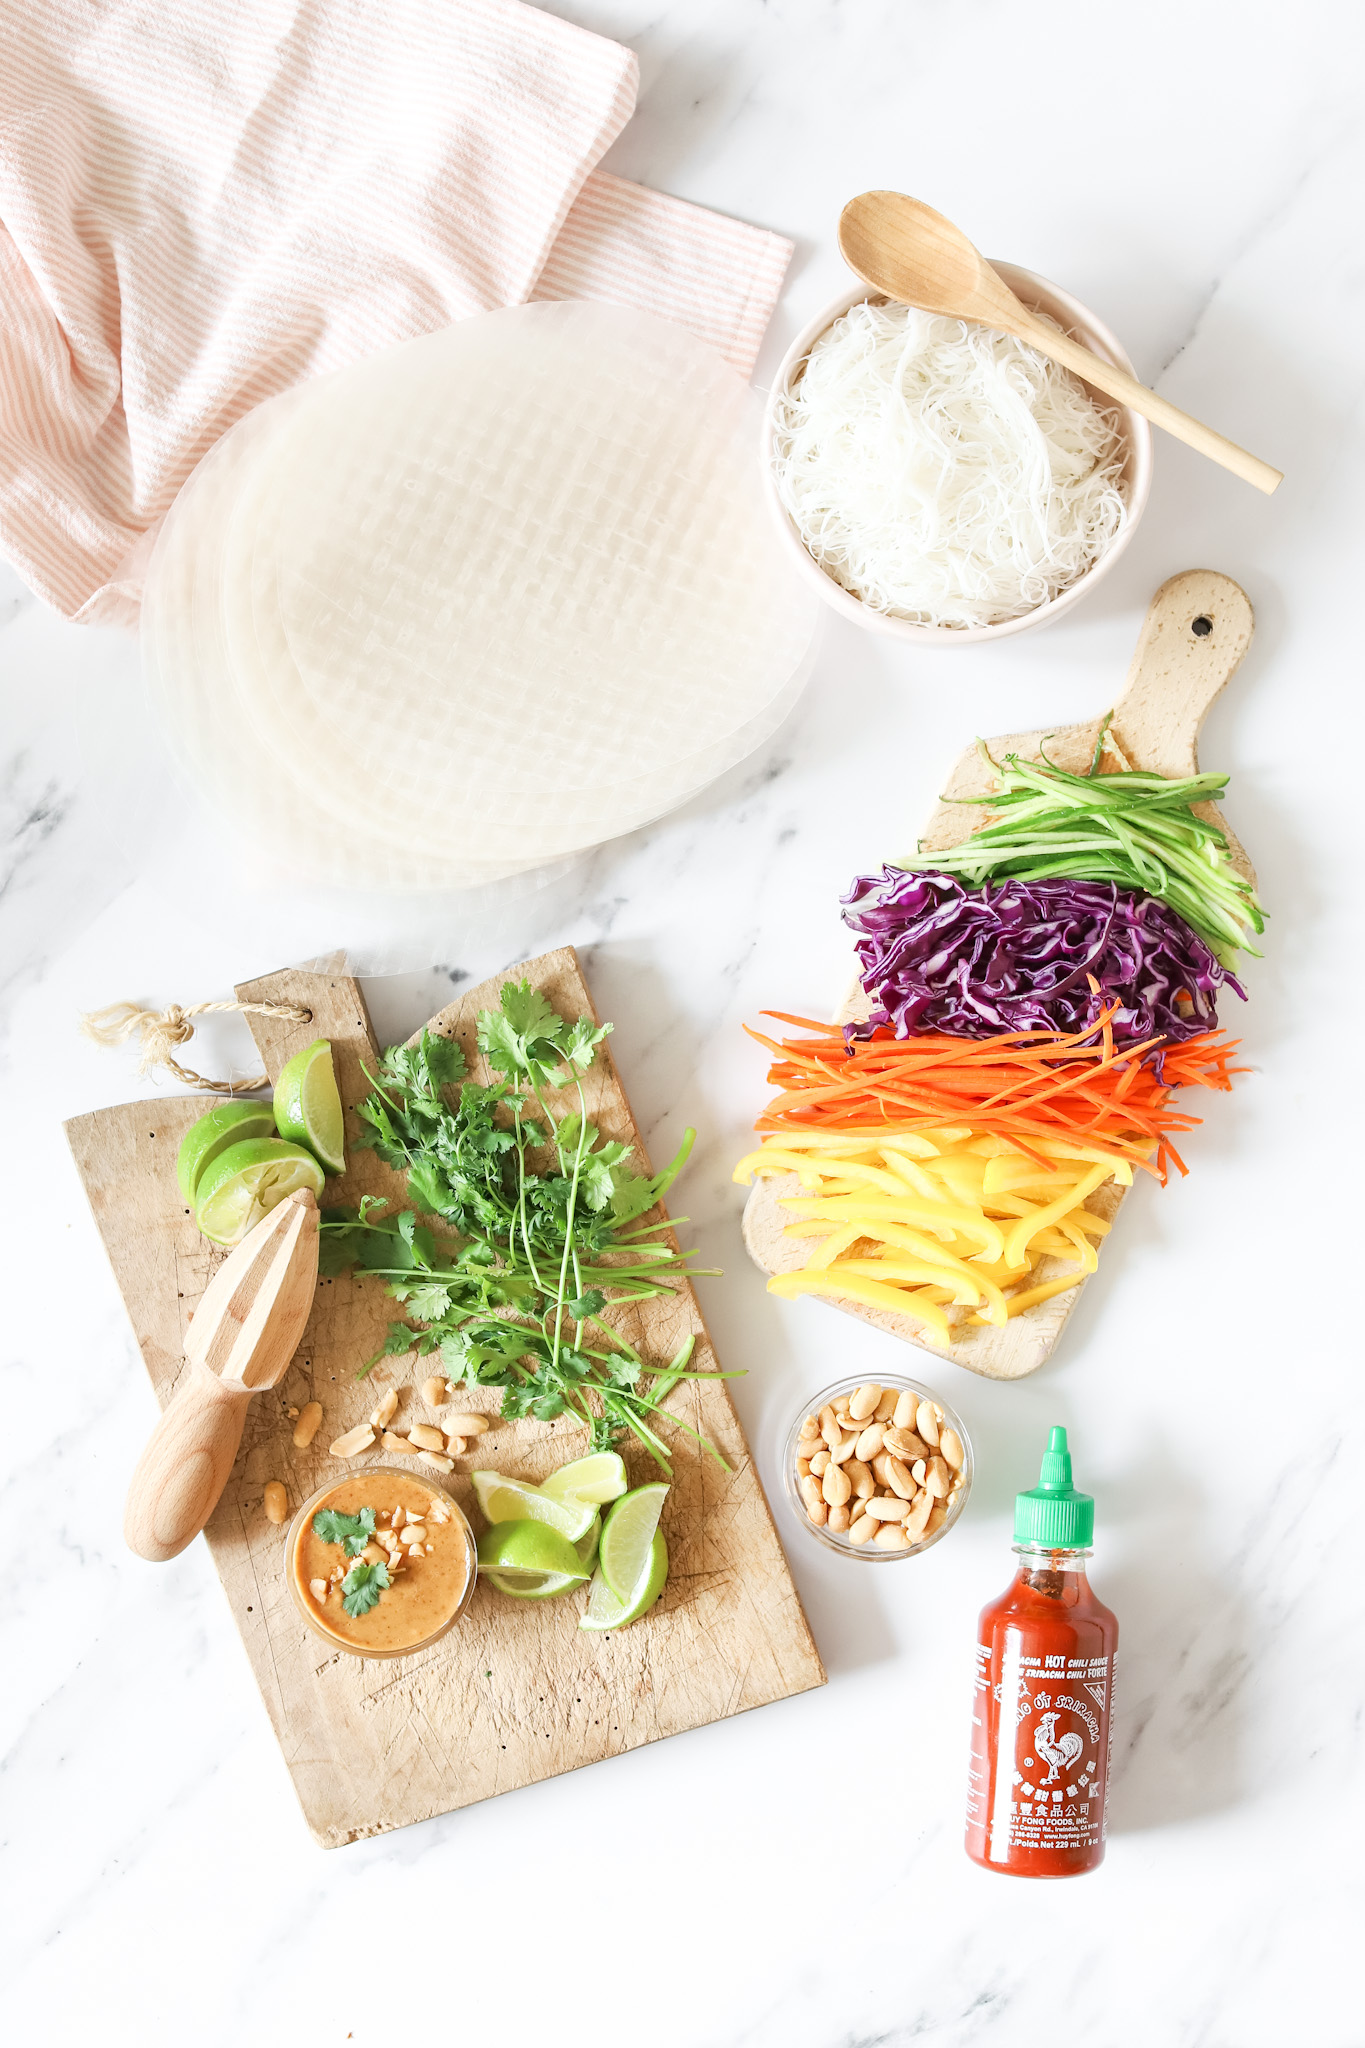 Ingredients to make Summer Salad Rolls with Peanut Sauce